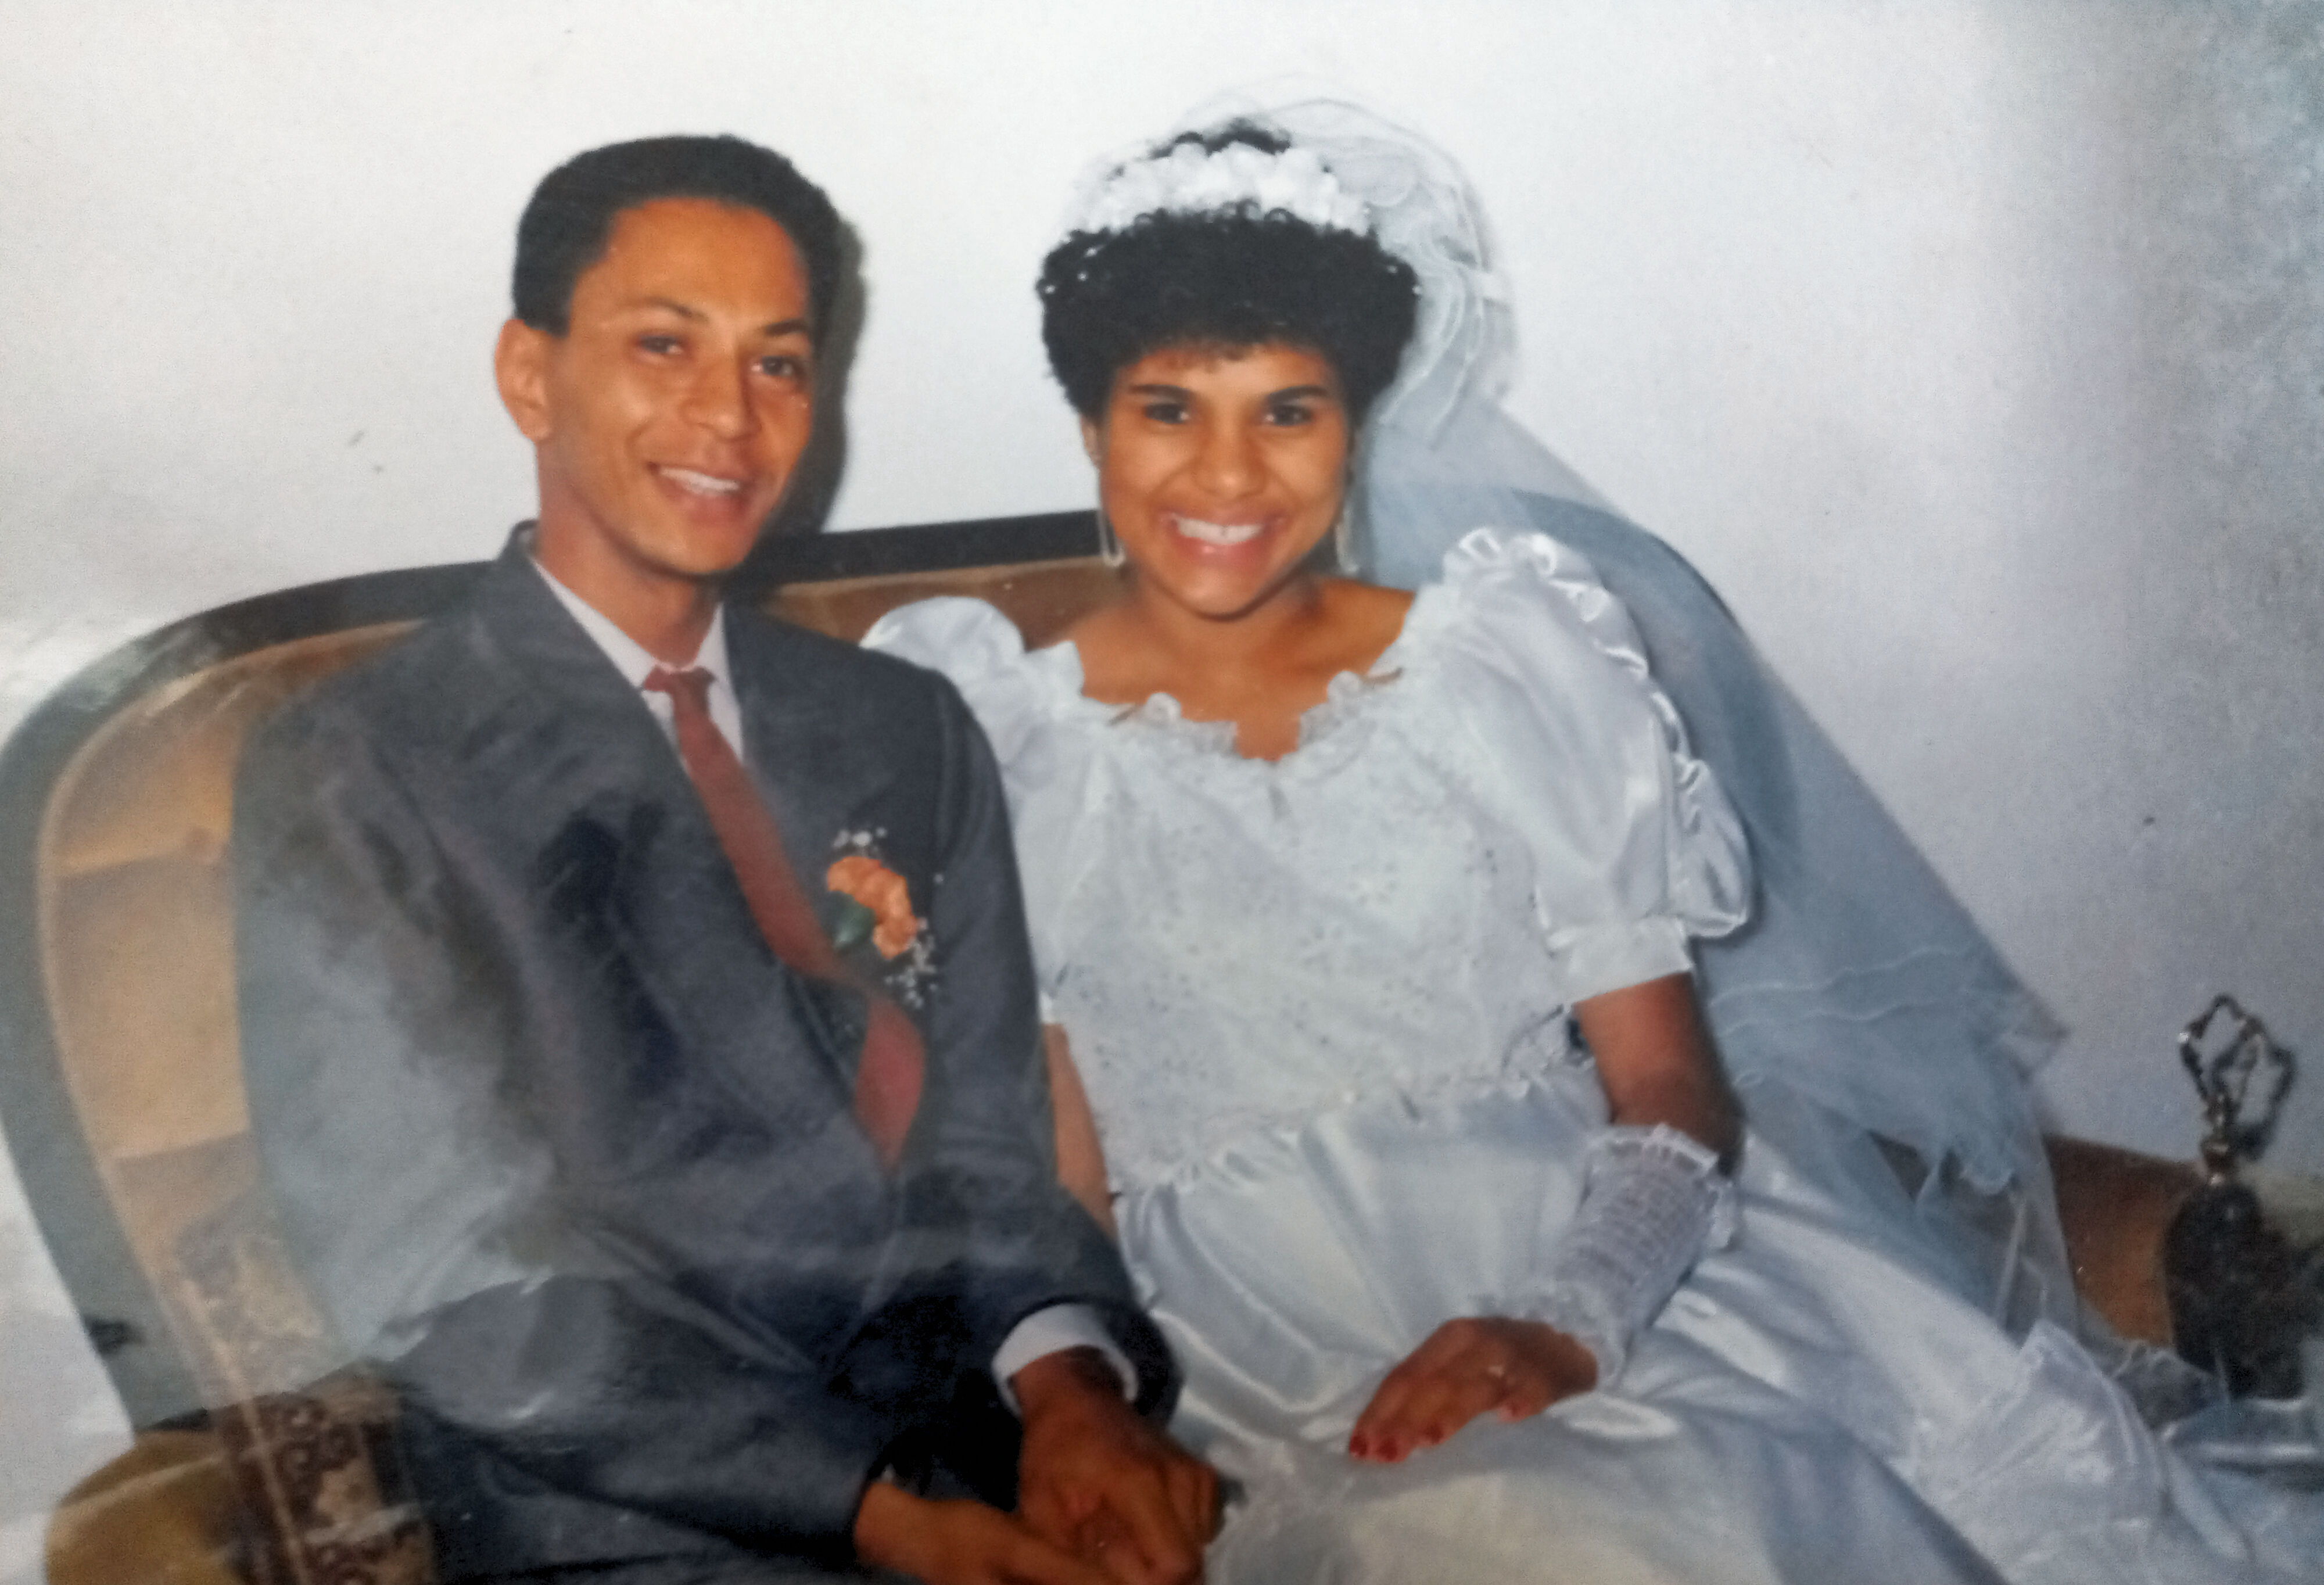 It was the best day of my life when I made her my wife. Back in the 1990s. 33 years and still going strong. 